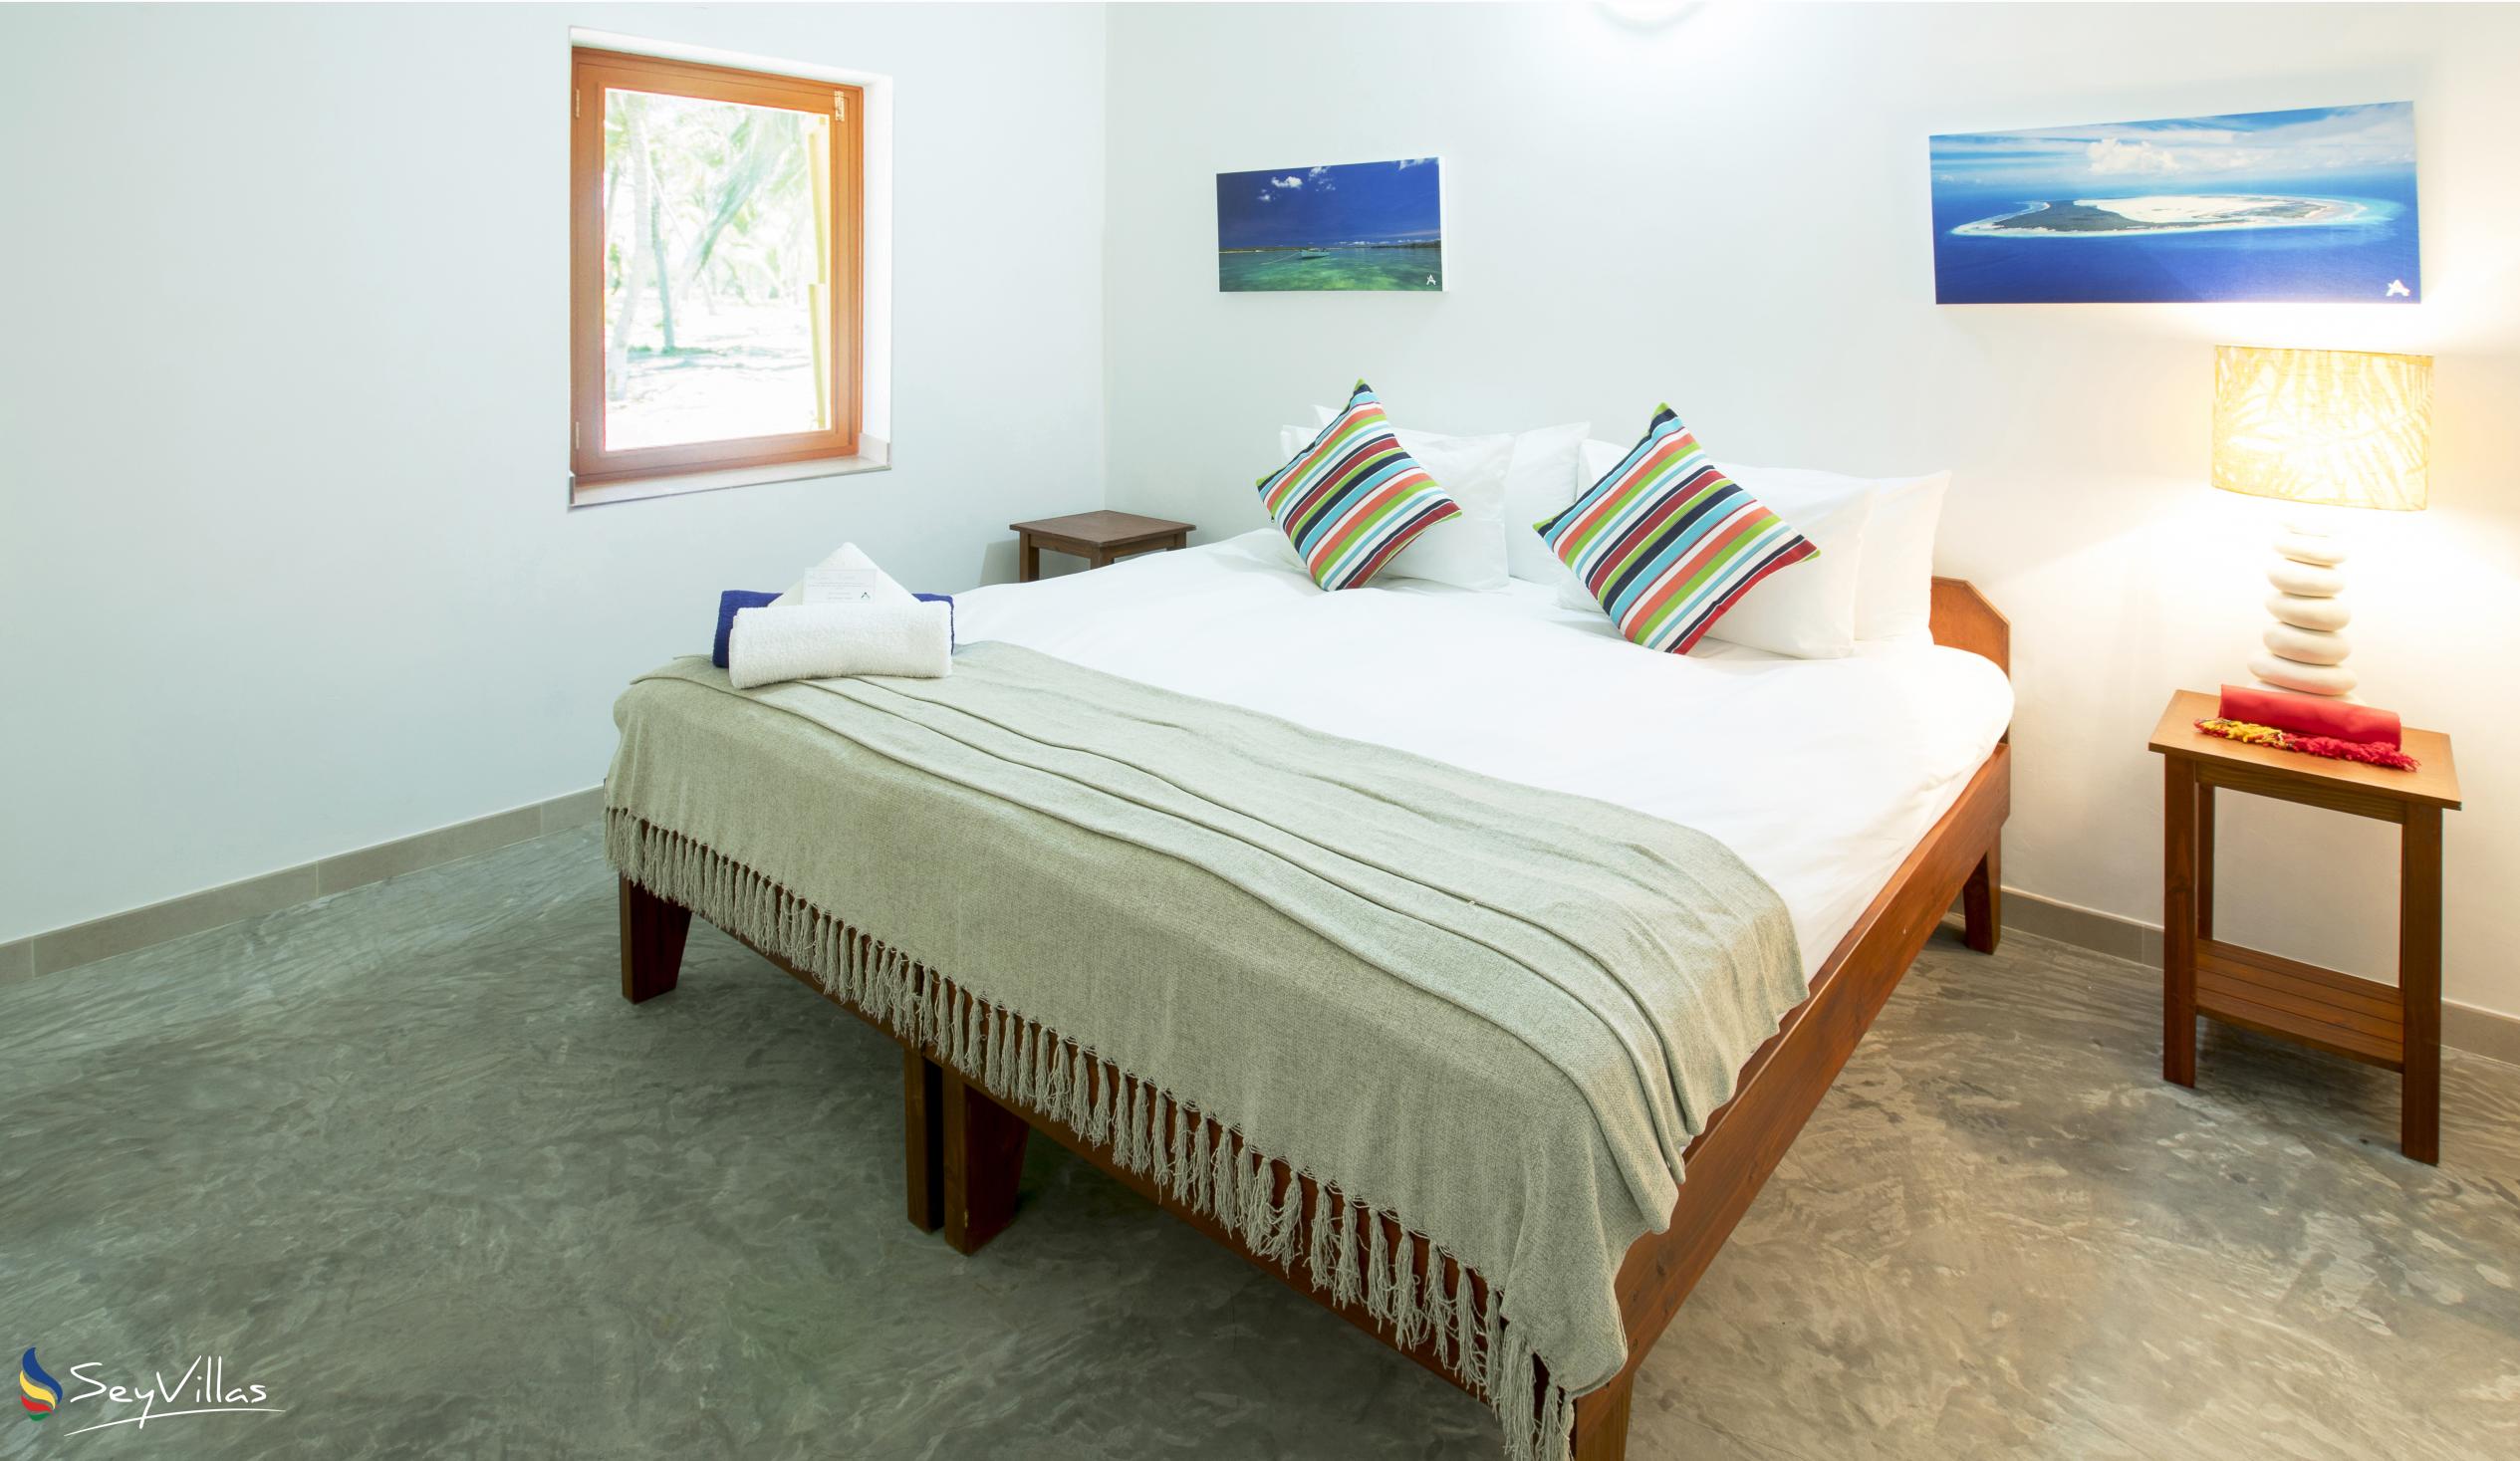 Foto 20: Astove Coral House - Doppelzimmer Fishing Package - Astove Island (Seychellen)